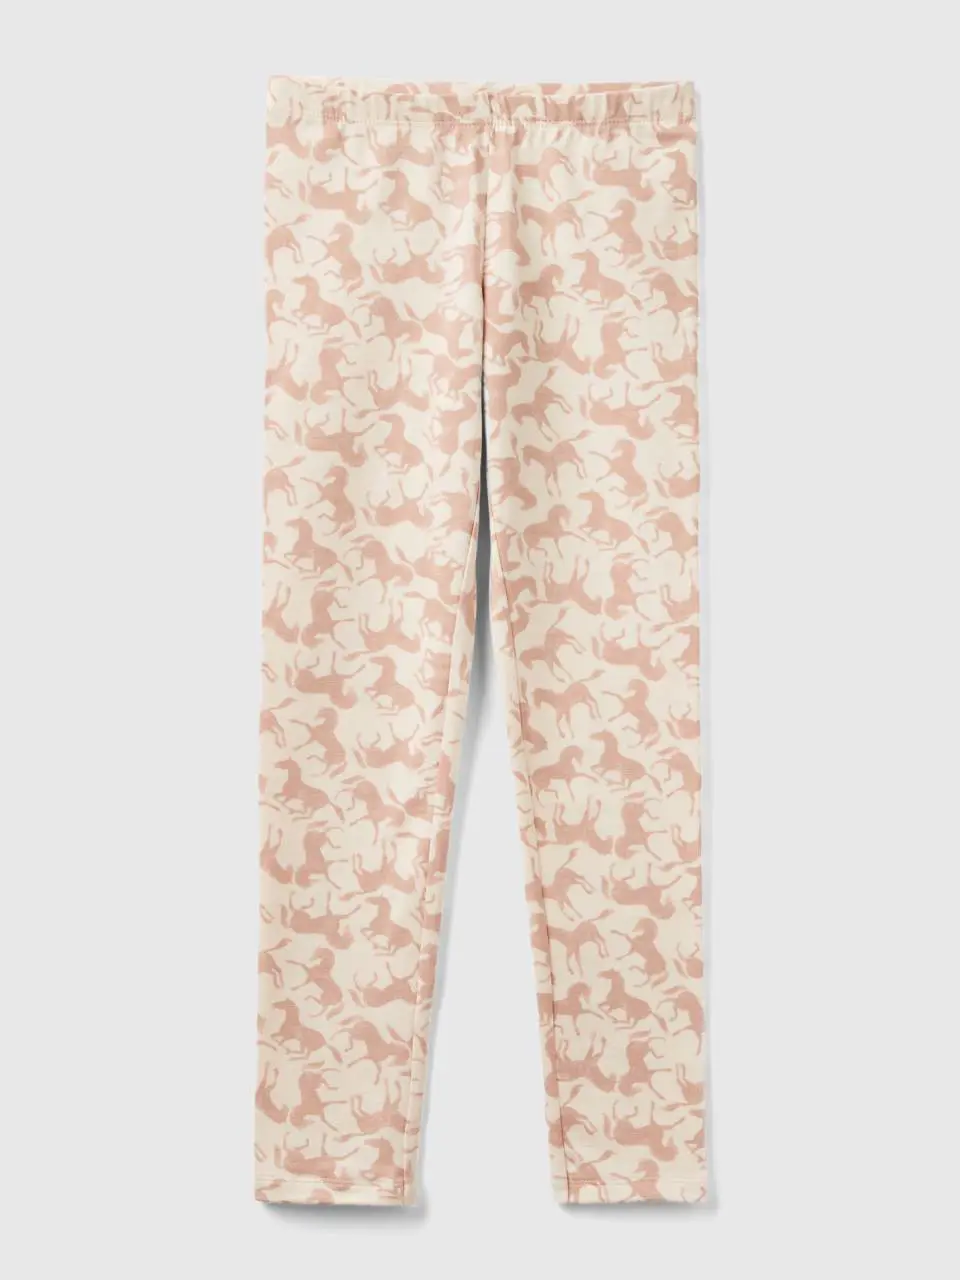 Benetton pale pink leggings with horse print. 1